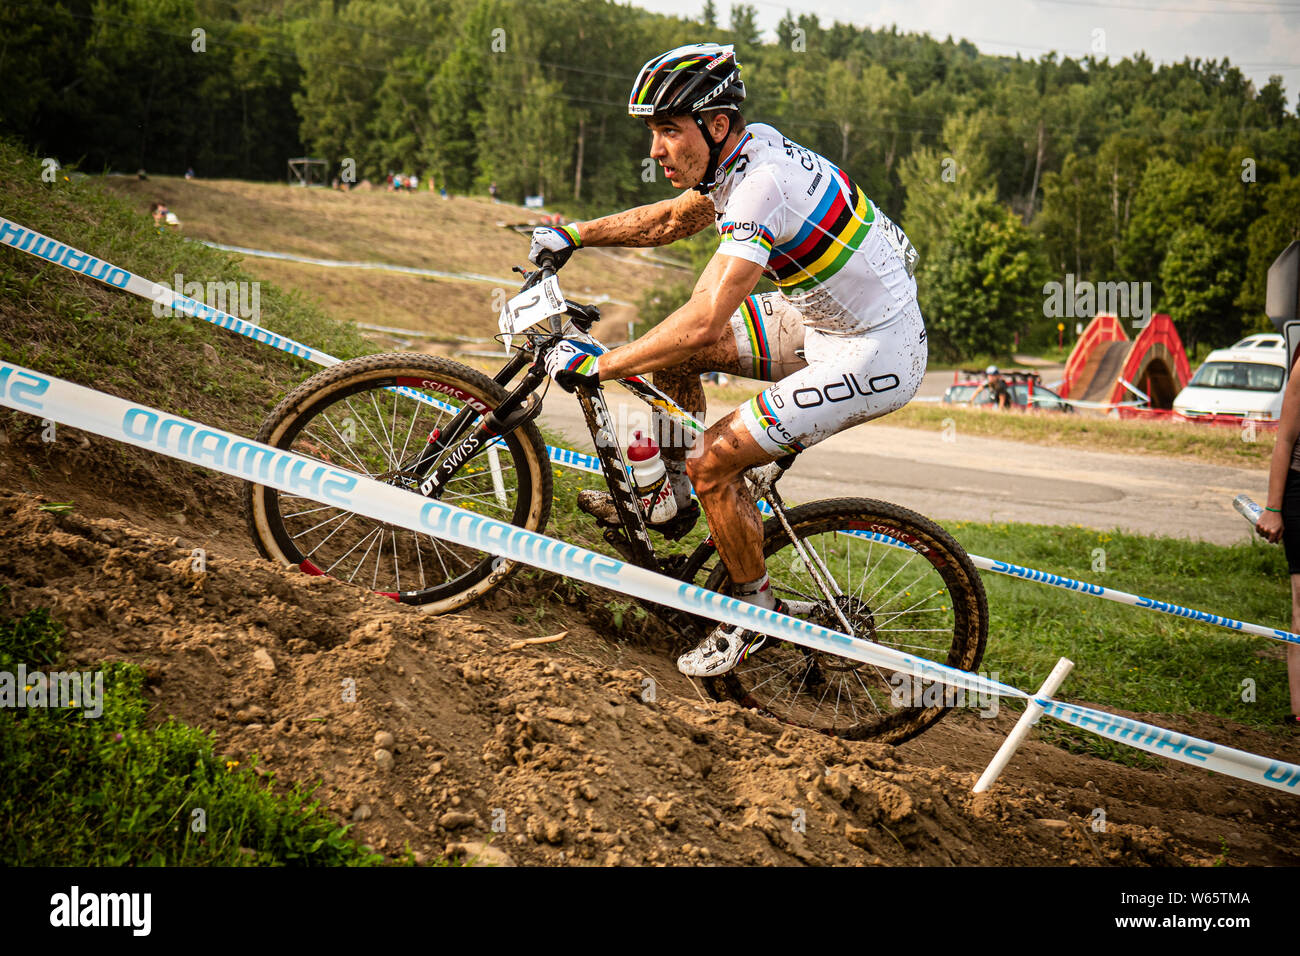 AUGUST 3, 2014 - MONT SAINTE ANNE, CANADA. Nino Schurter at the UCI  Mountain Bike Cross Country World Cup Stock Photo - Alamy